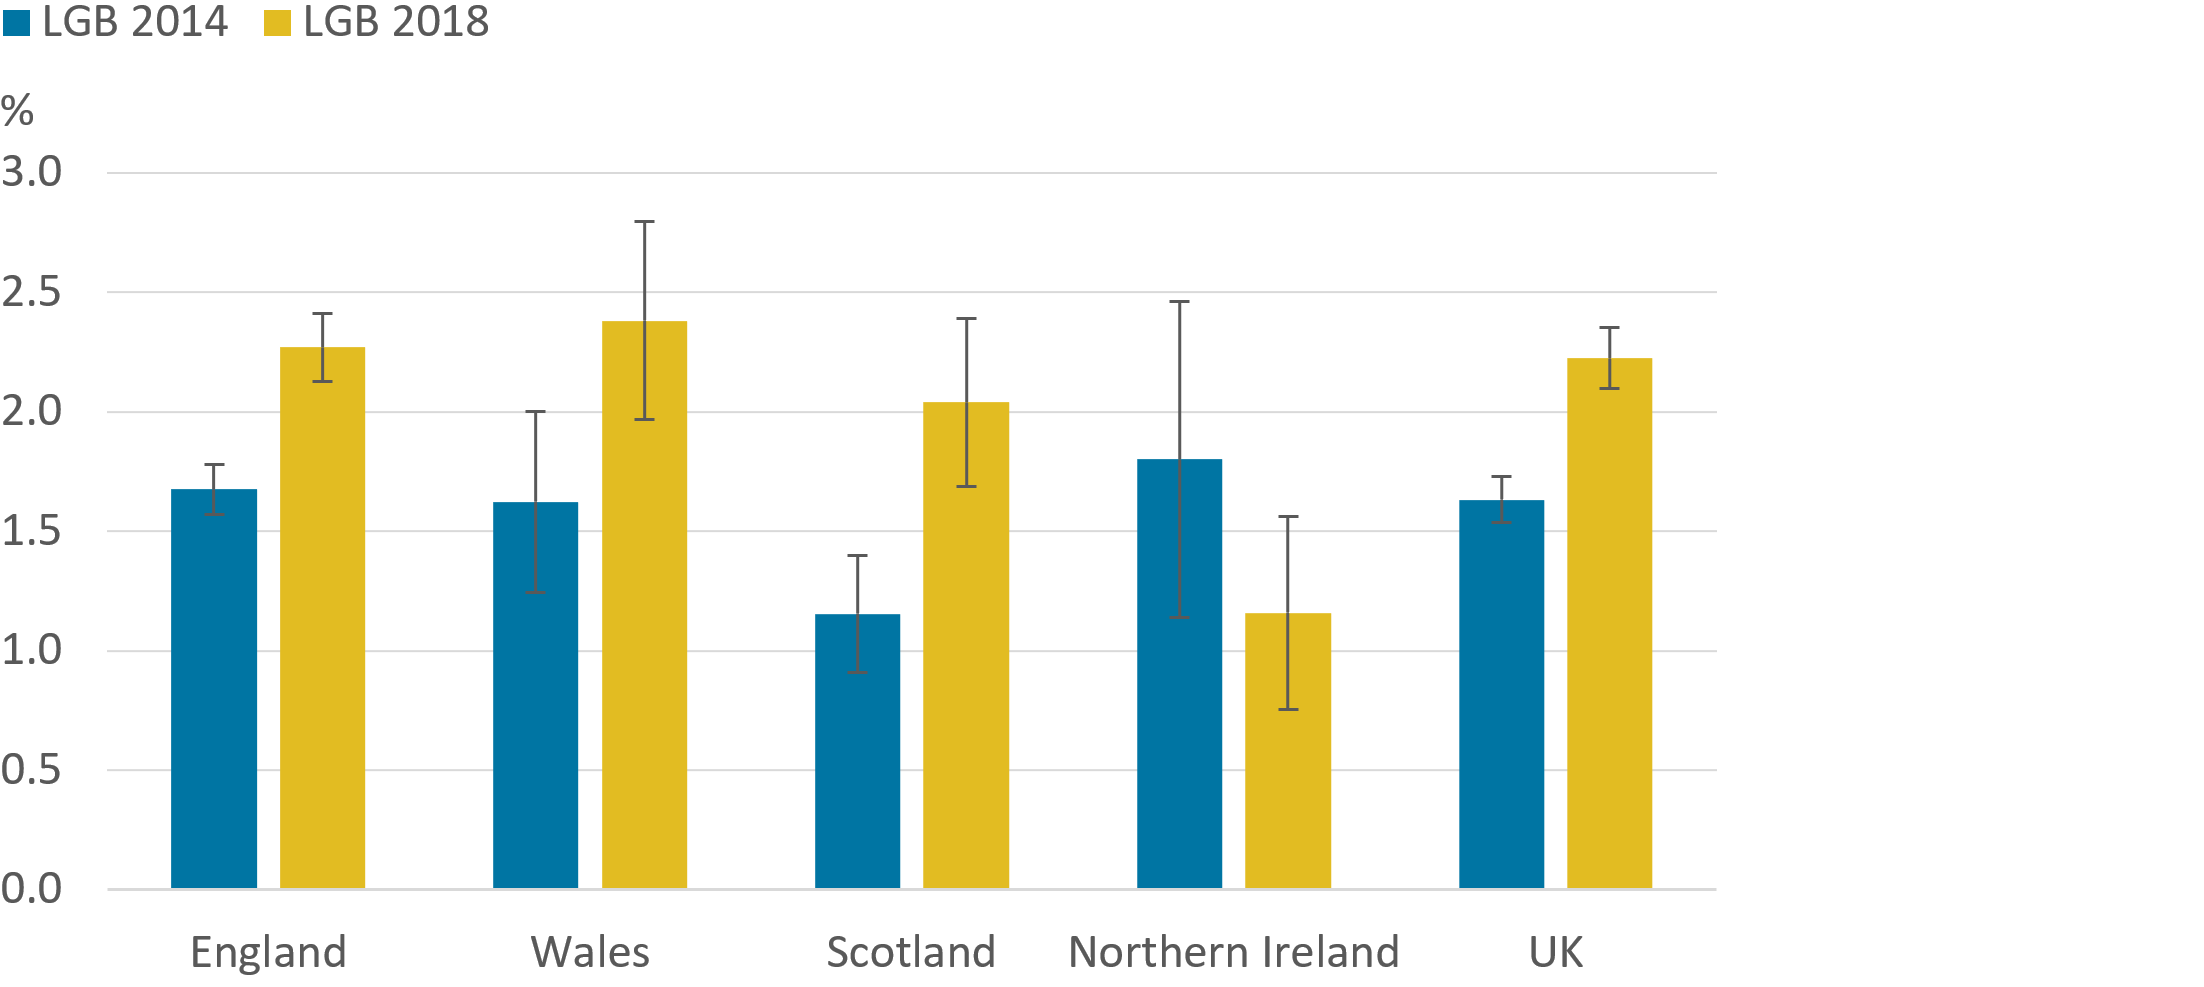 In 2018, a lower proportion of people in Northern Ireland identify themselves as lesbian, gay or bisexual (LGB) than in other UK countries.